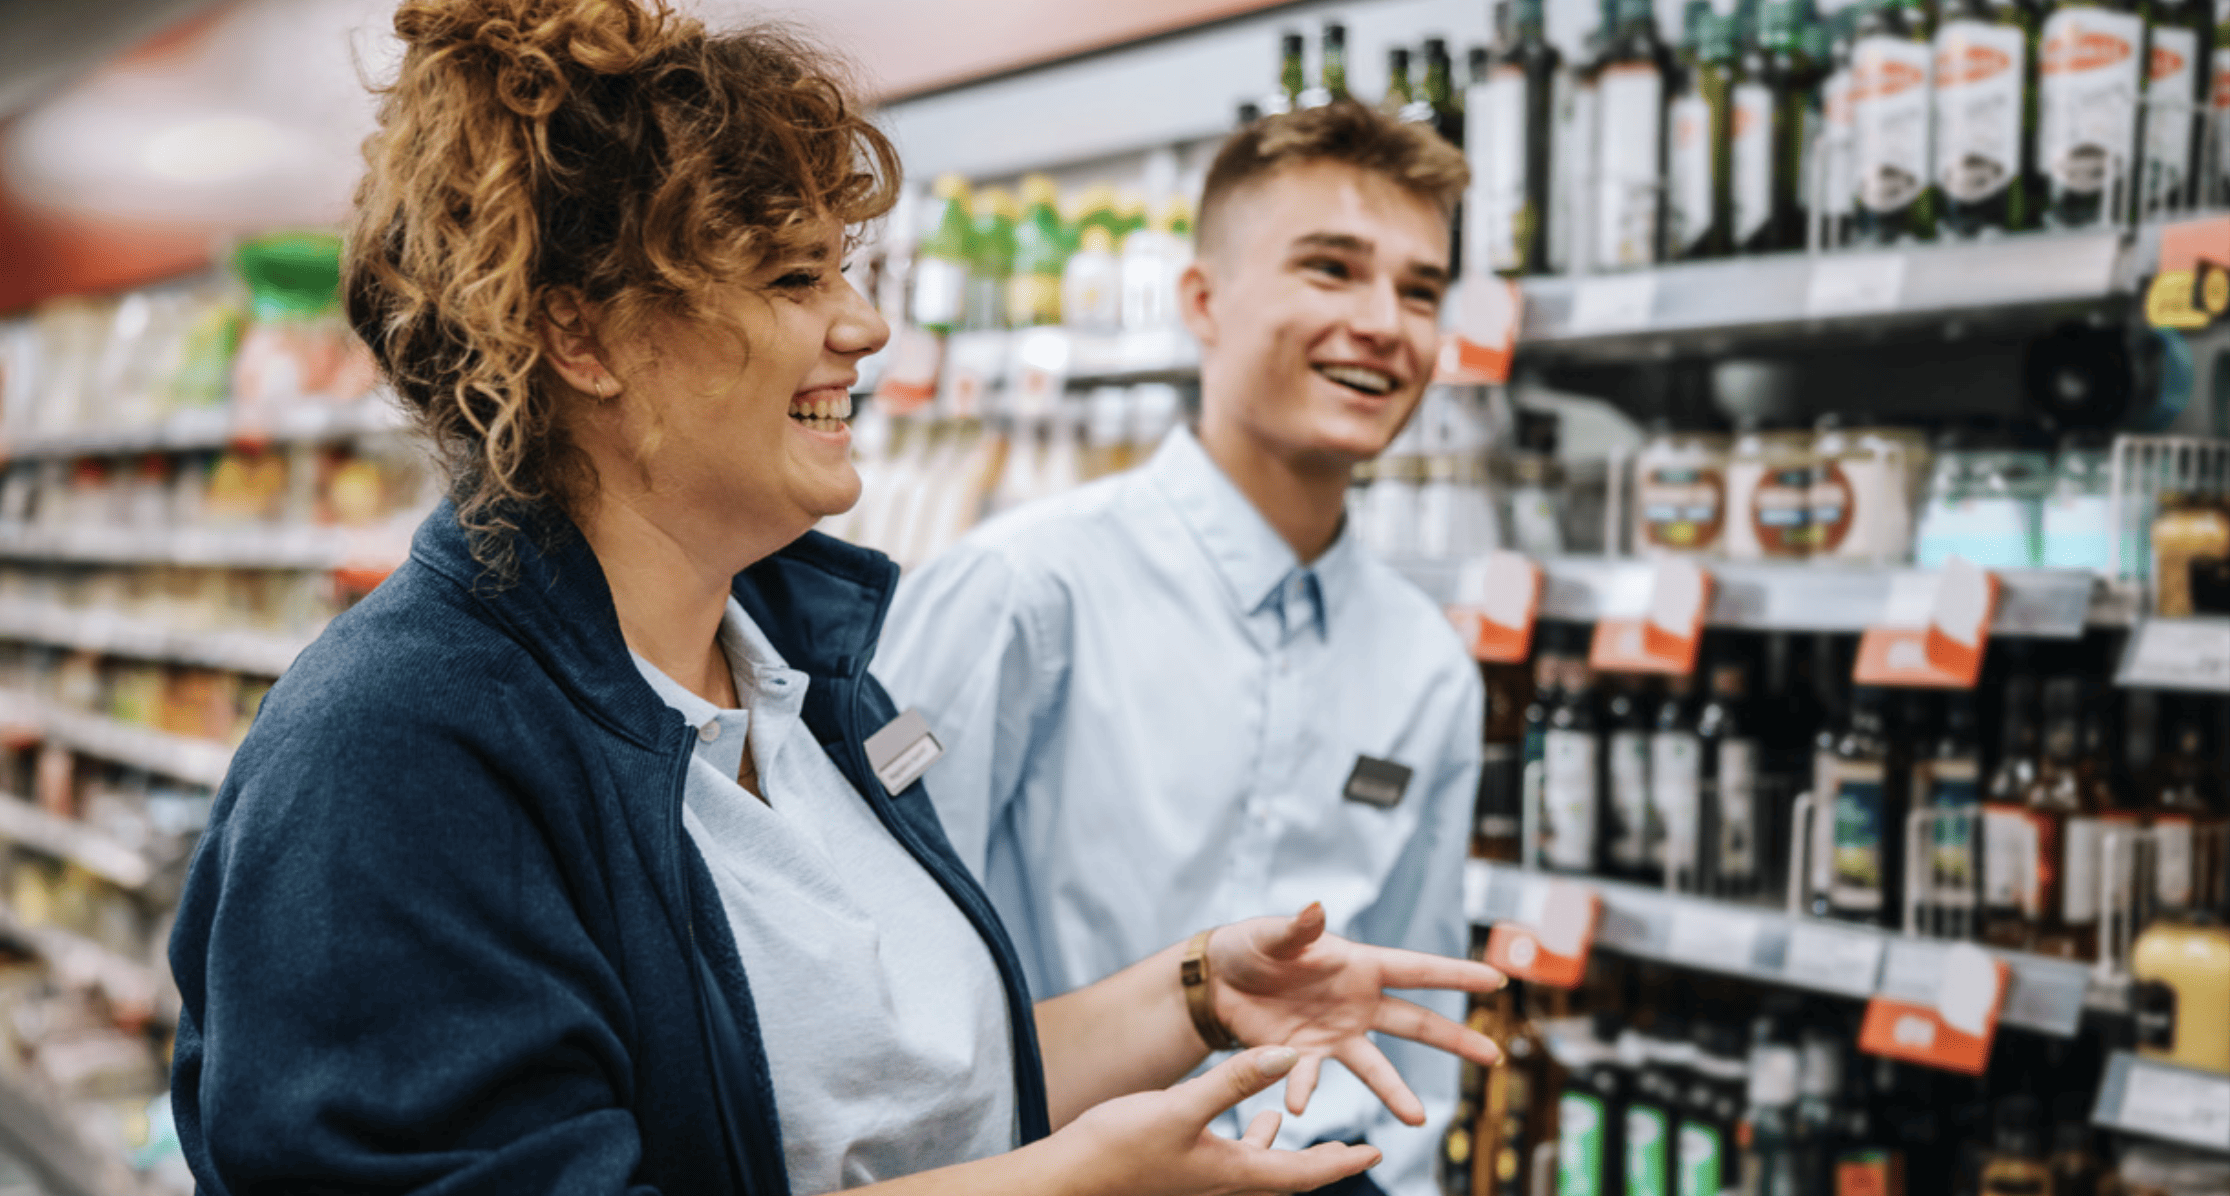 grocery store manager and employee smiling